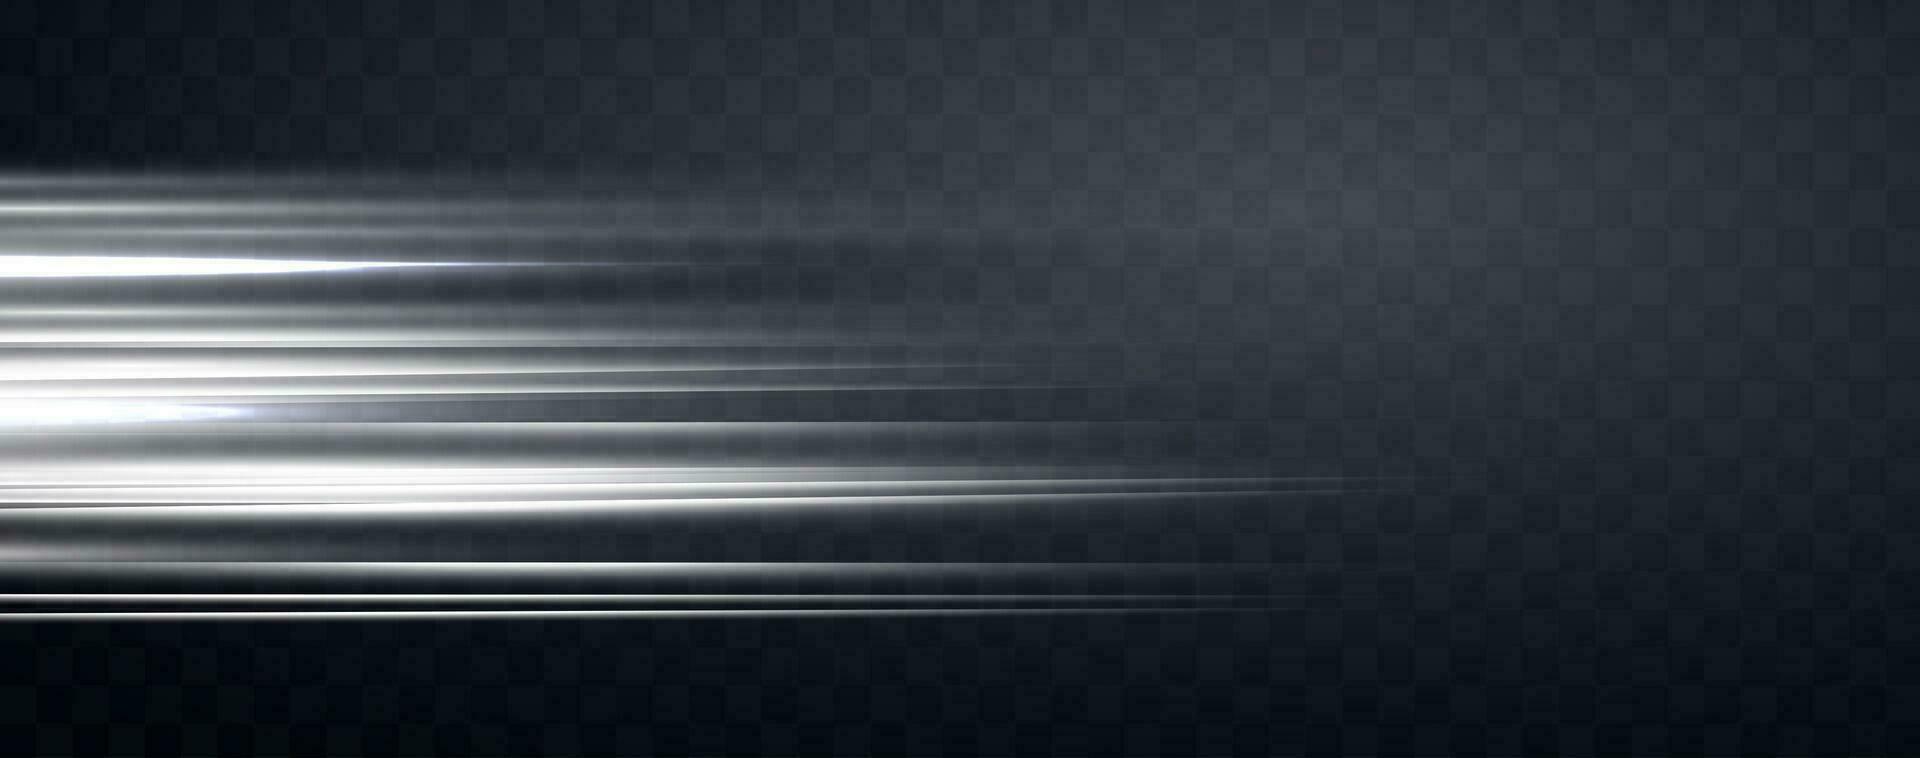 Speed rays, light neon flow, zoom in motion effect, silver glow speed lines, colorful light trails, stripes. Abstract background, vector illustration.